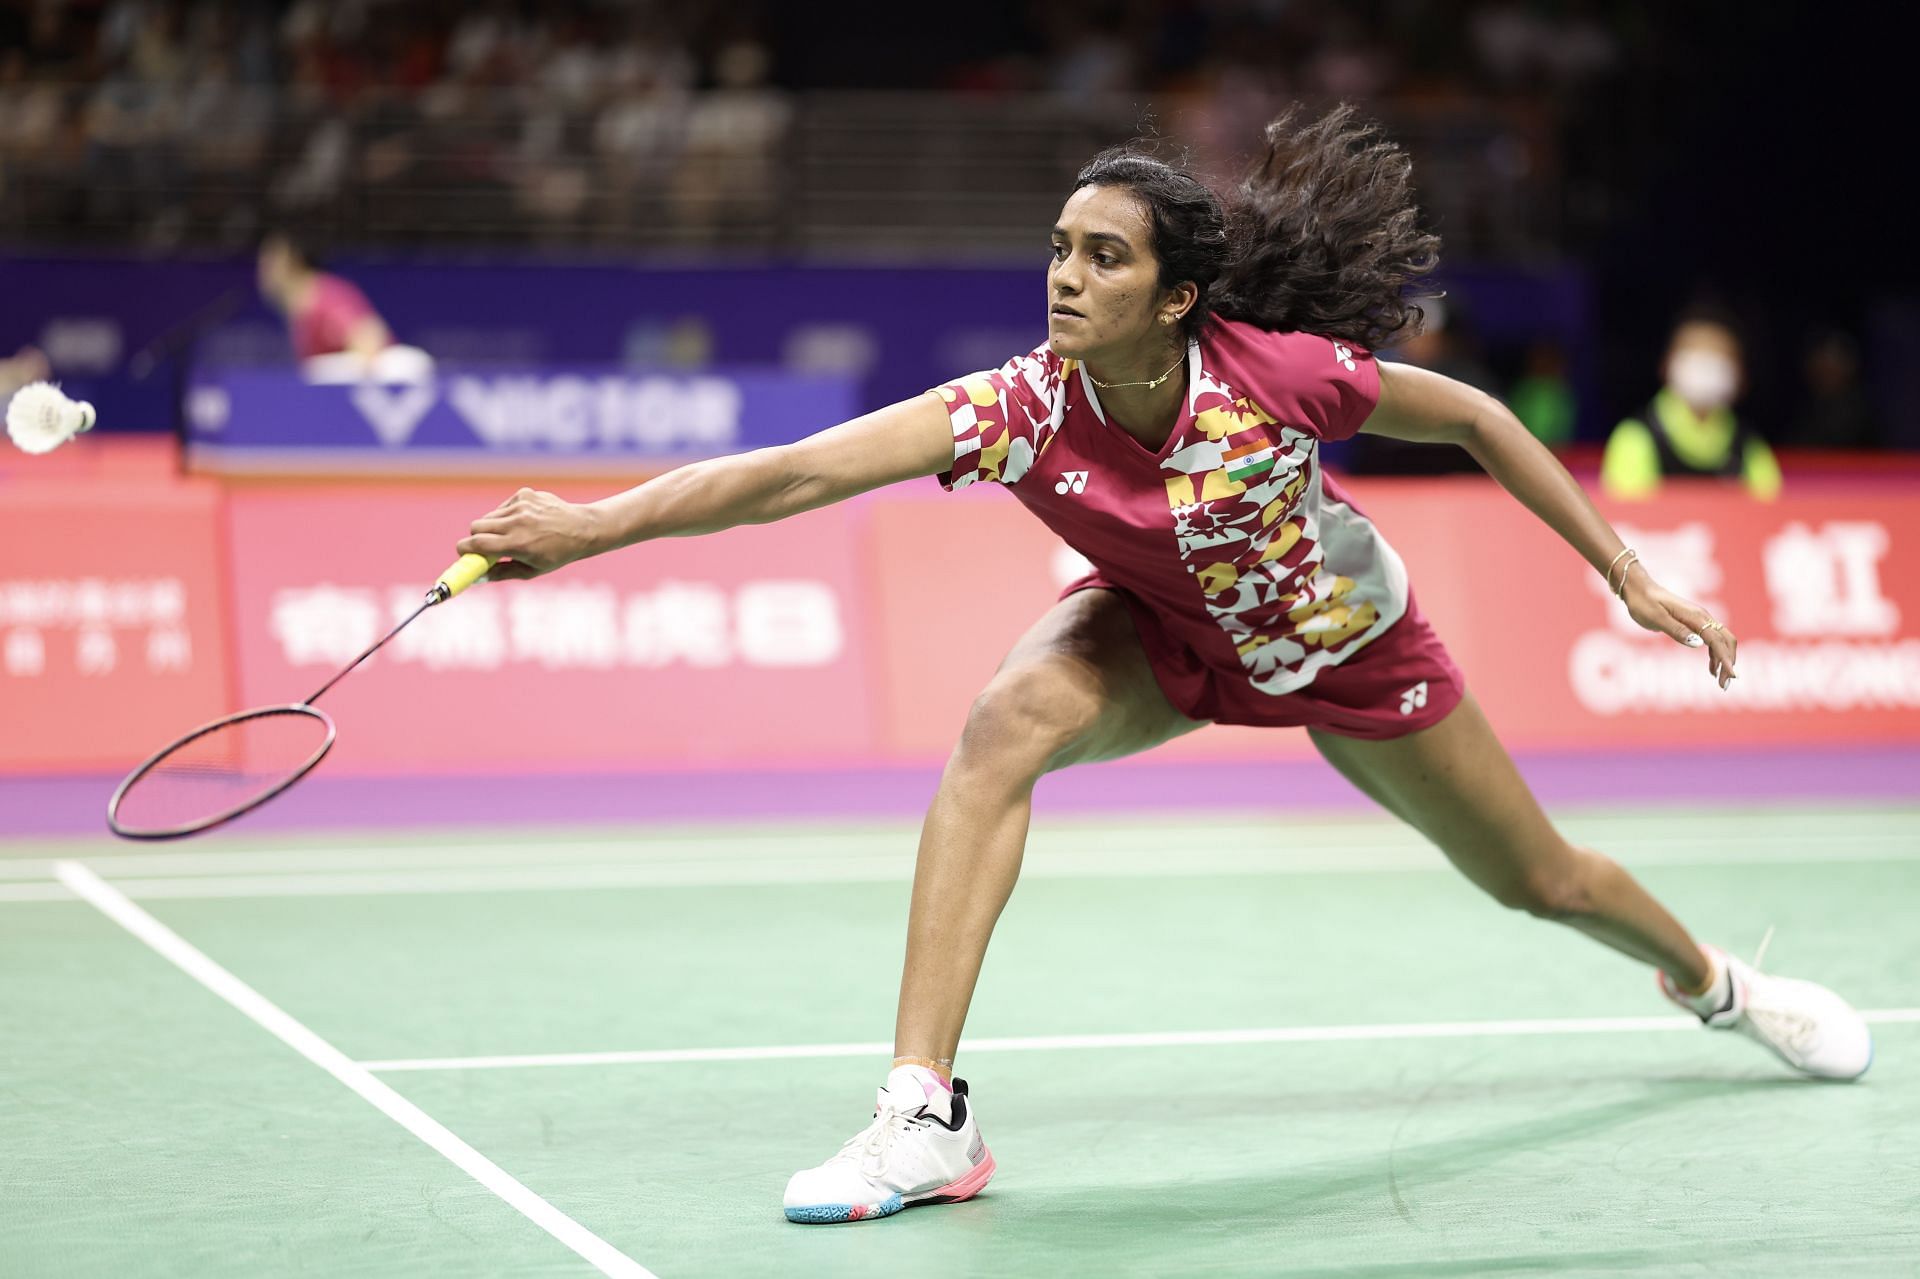 Indonesia Open 2023 PV Sindhu vs Gregoria Mariska Tunjung, head-to-head, prediction, where to watch and live streaming details